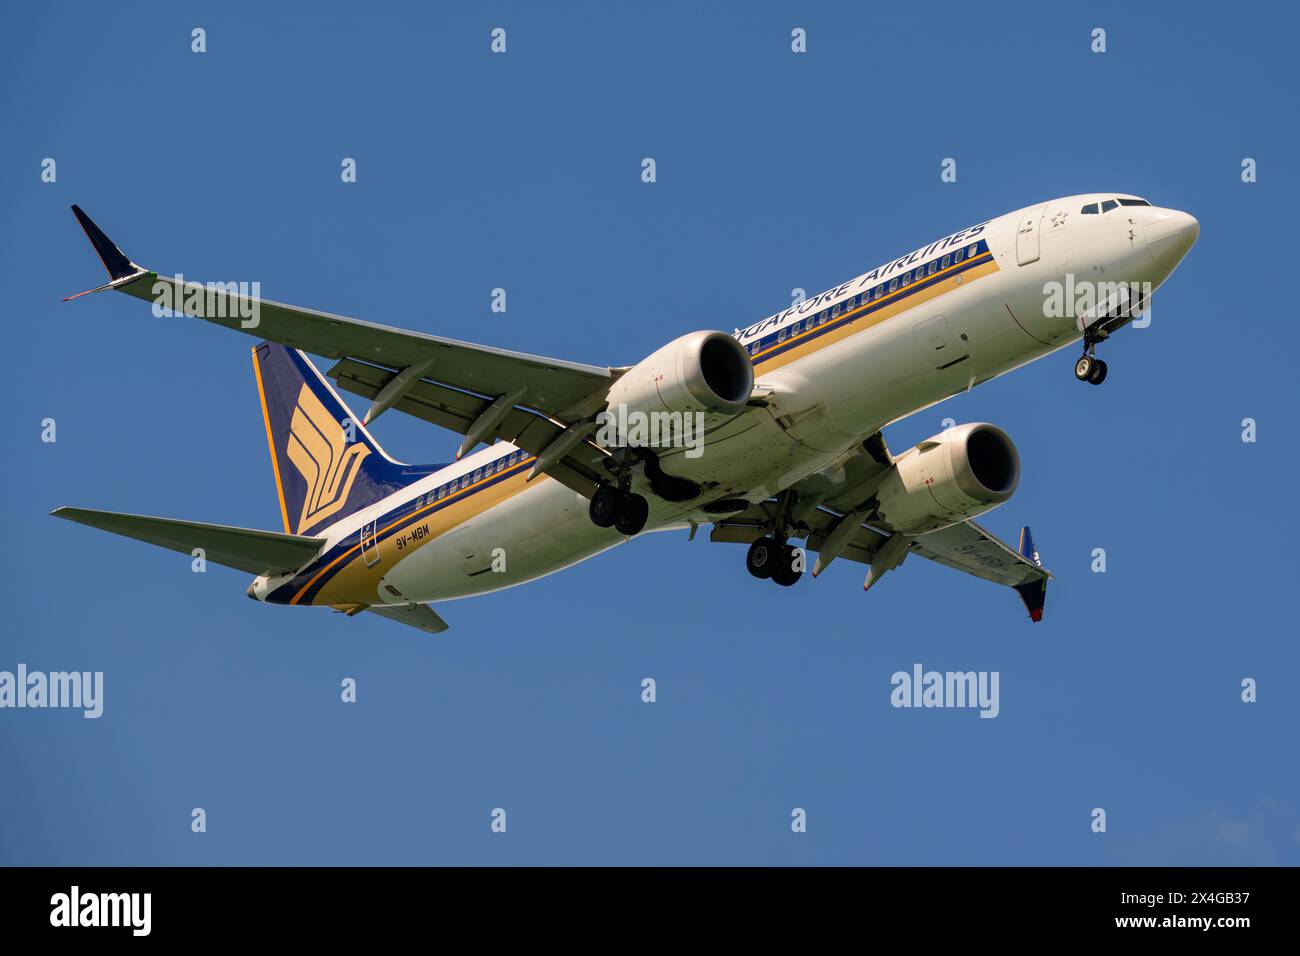 Singapore Airlines, Boeing 737 MAX 8, 9V-MBM, on final approach to Singapore Changi airport Stock Photo